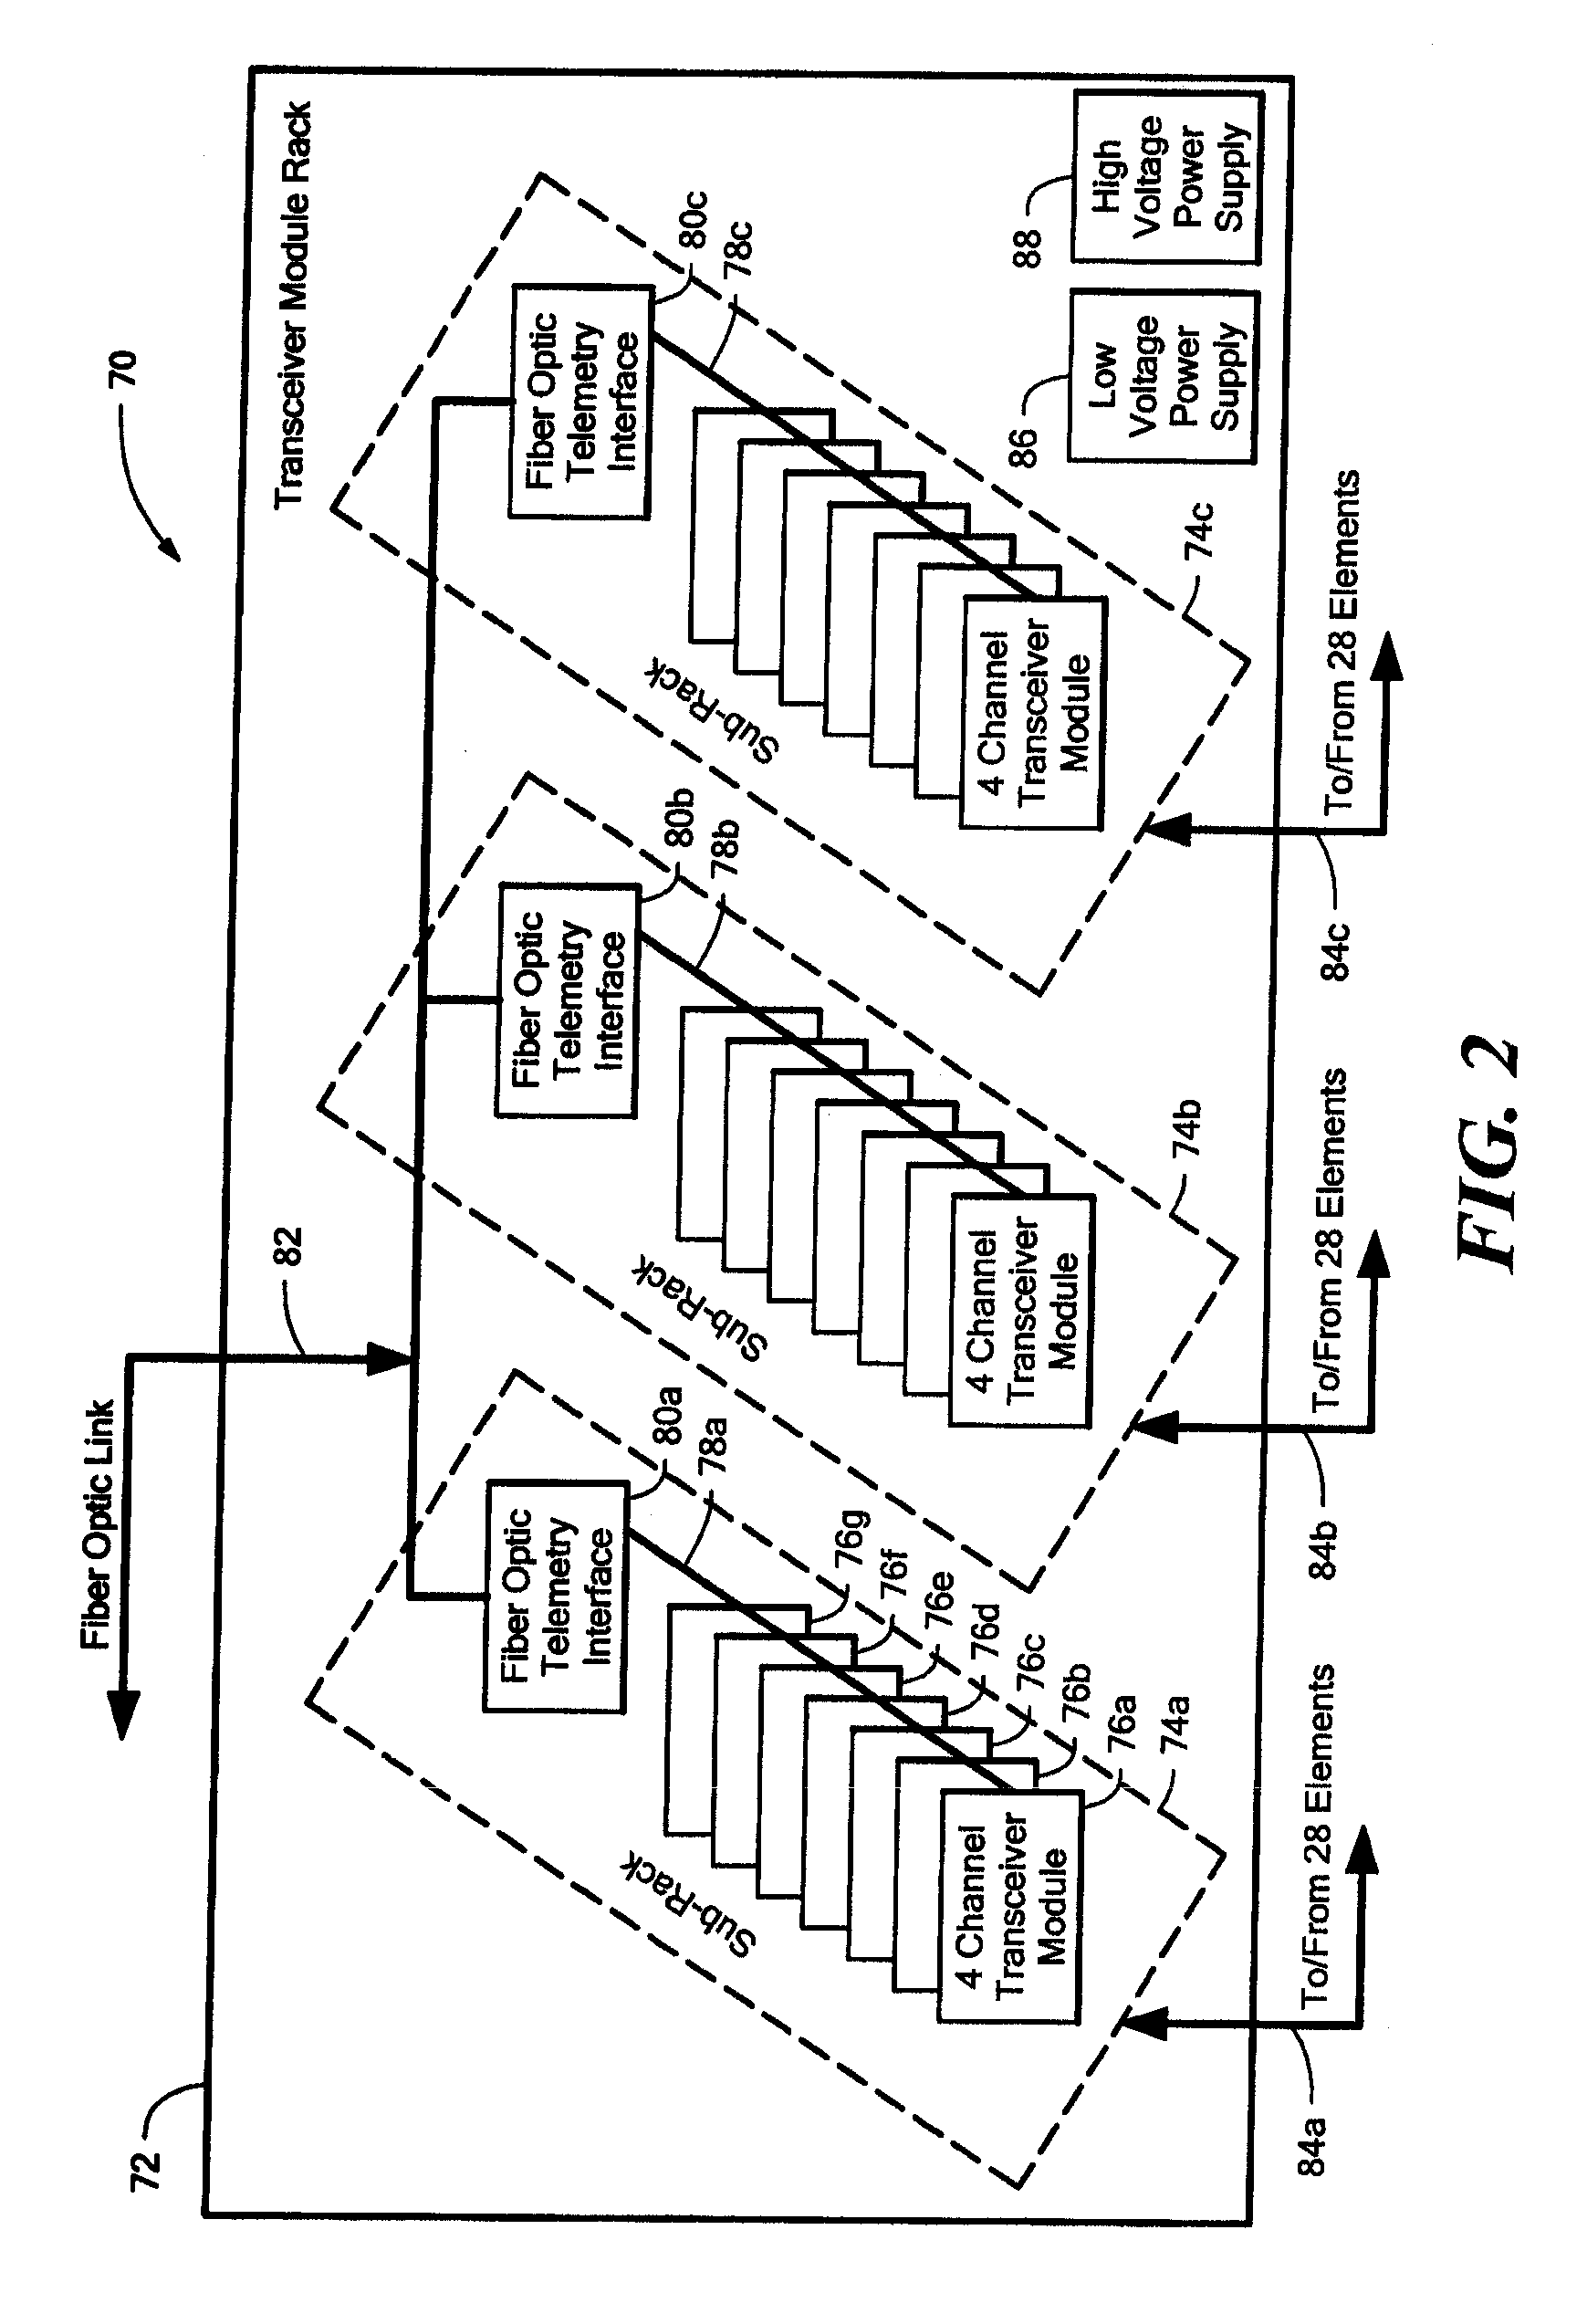 Method and apparatus for acoustic system having a transceiver module